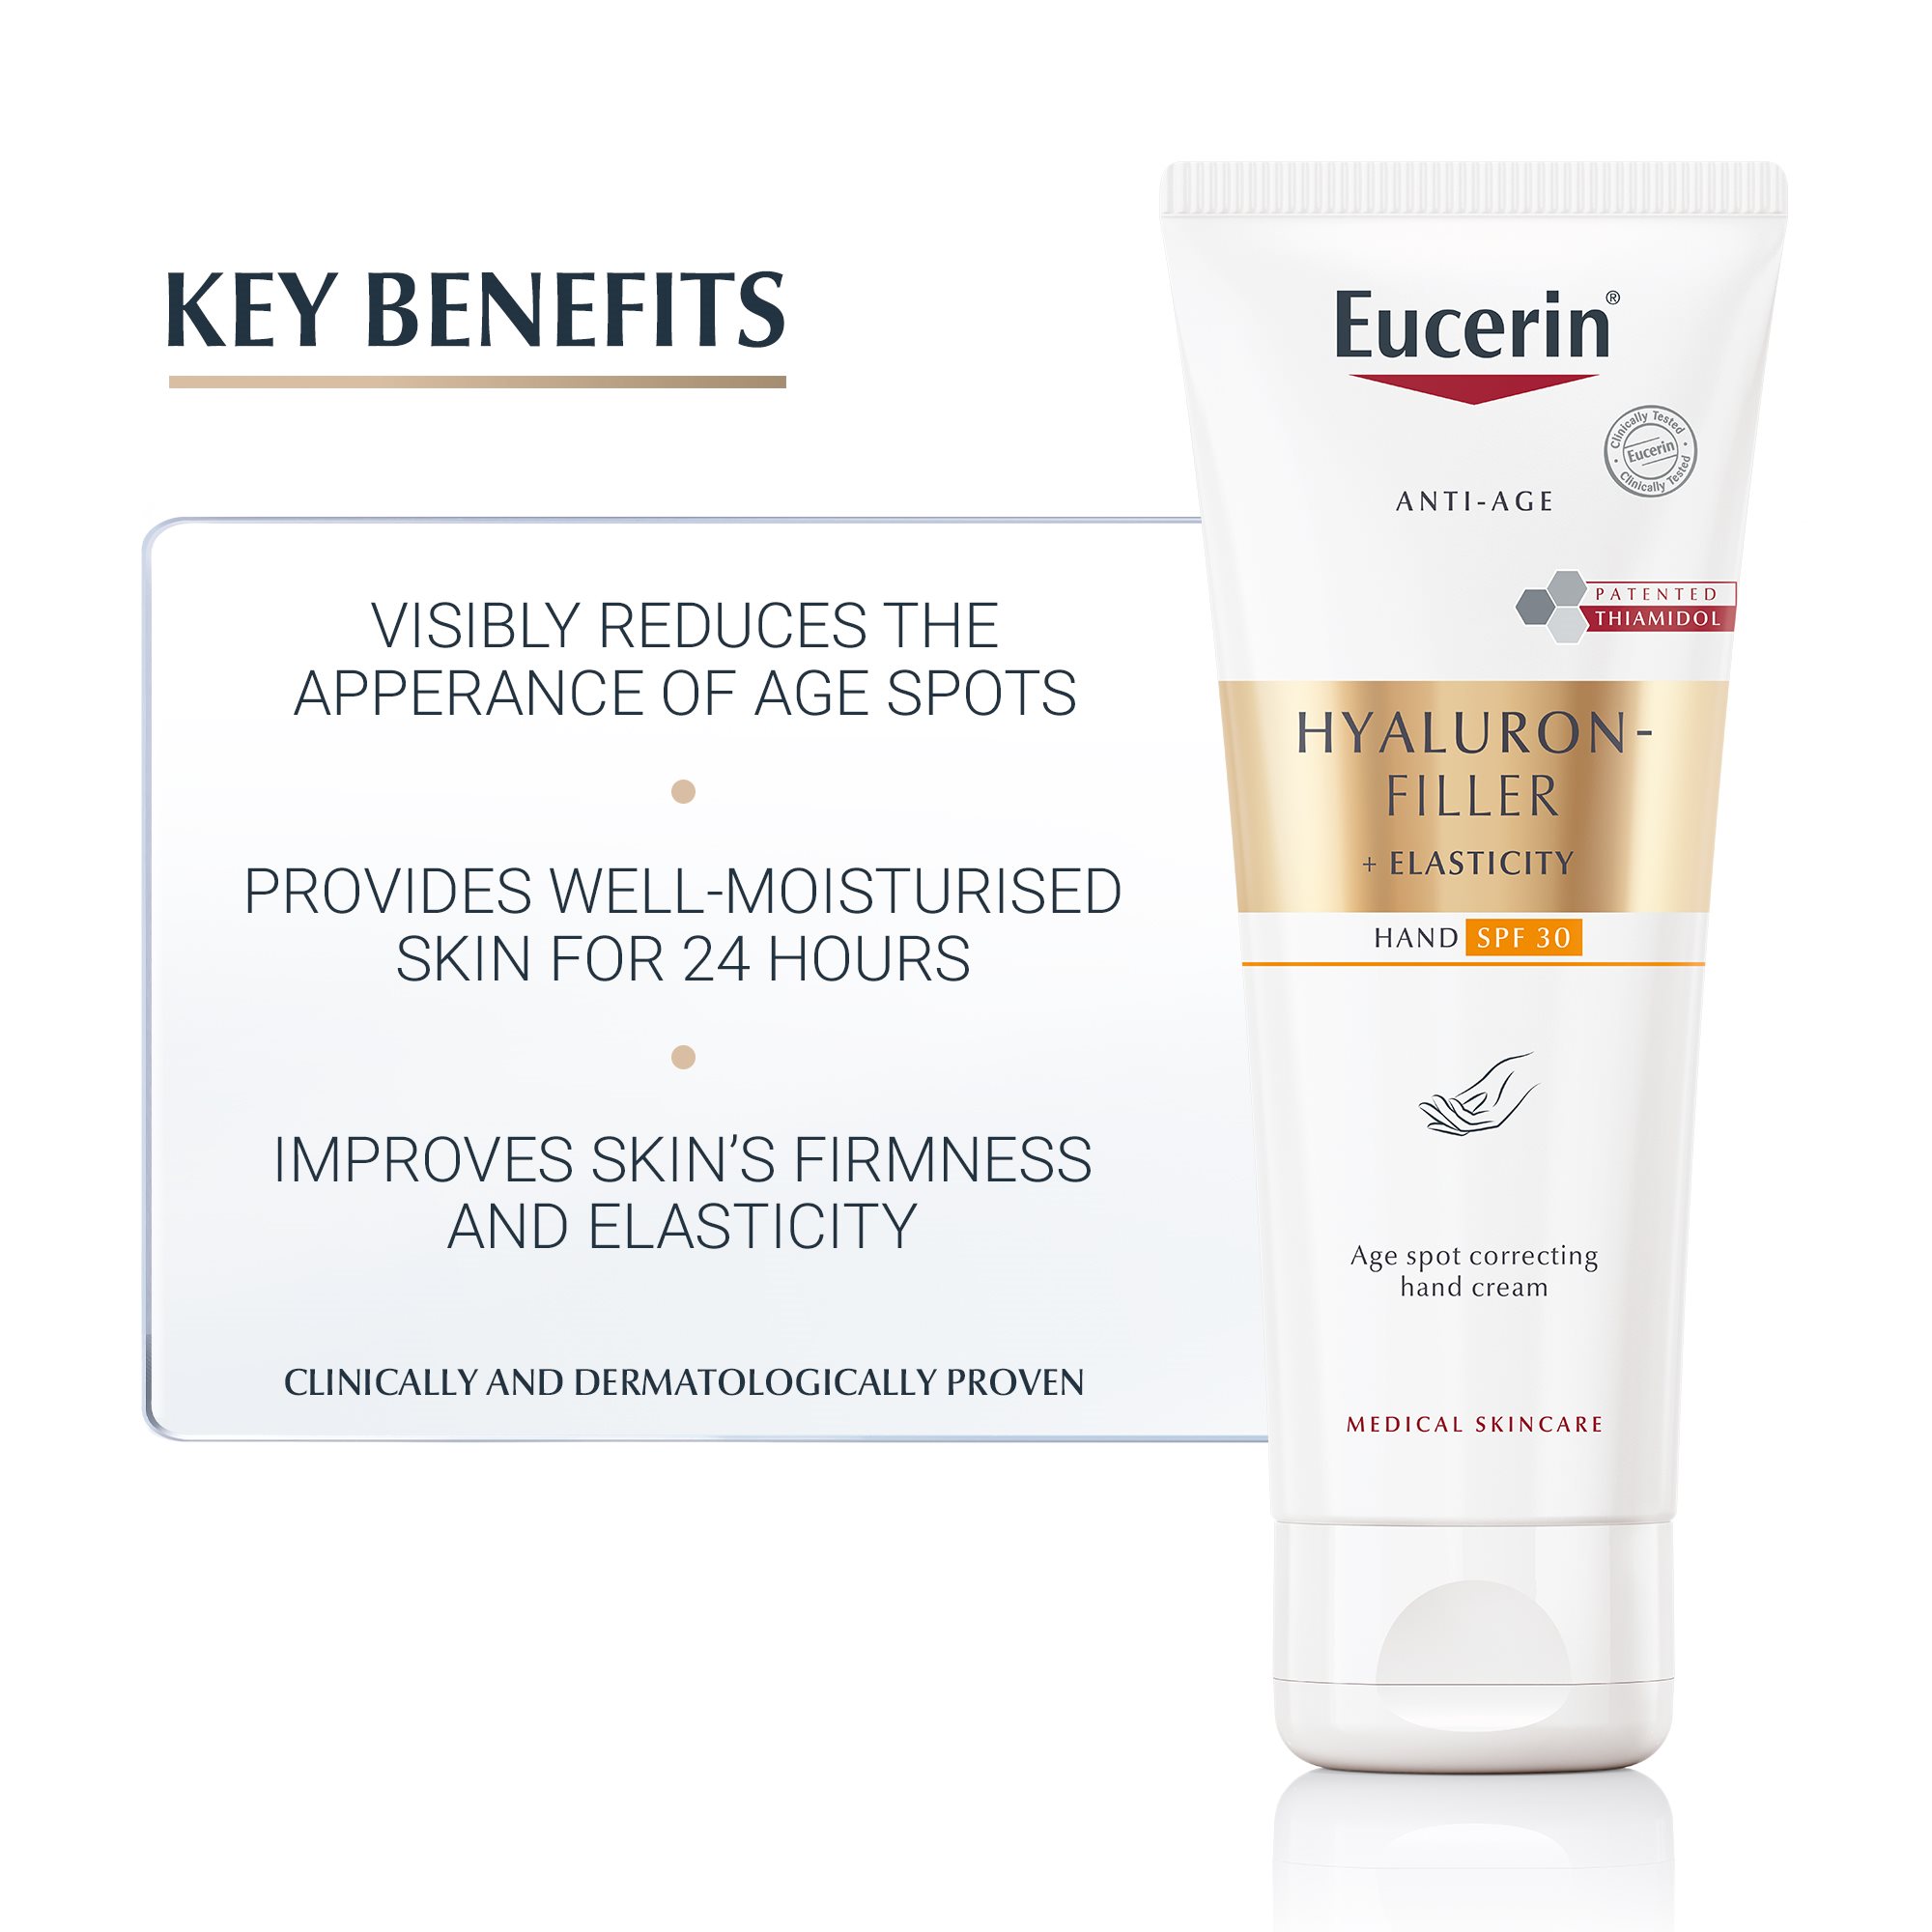 Eucerin Hyaluron-Filler + Elasticity Age Spot Correcting Hand Cream - Visibly reduces the appearance of pigment spots on the hands